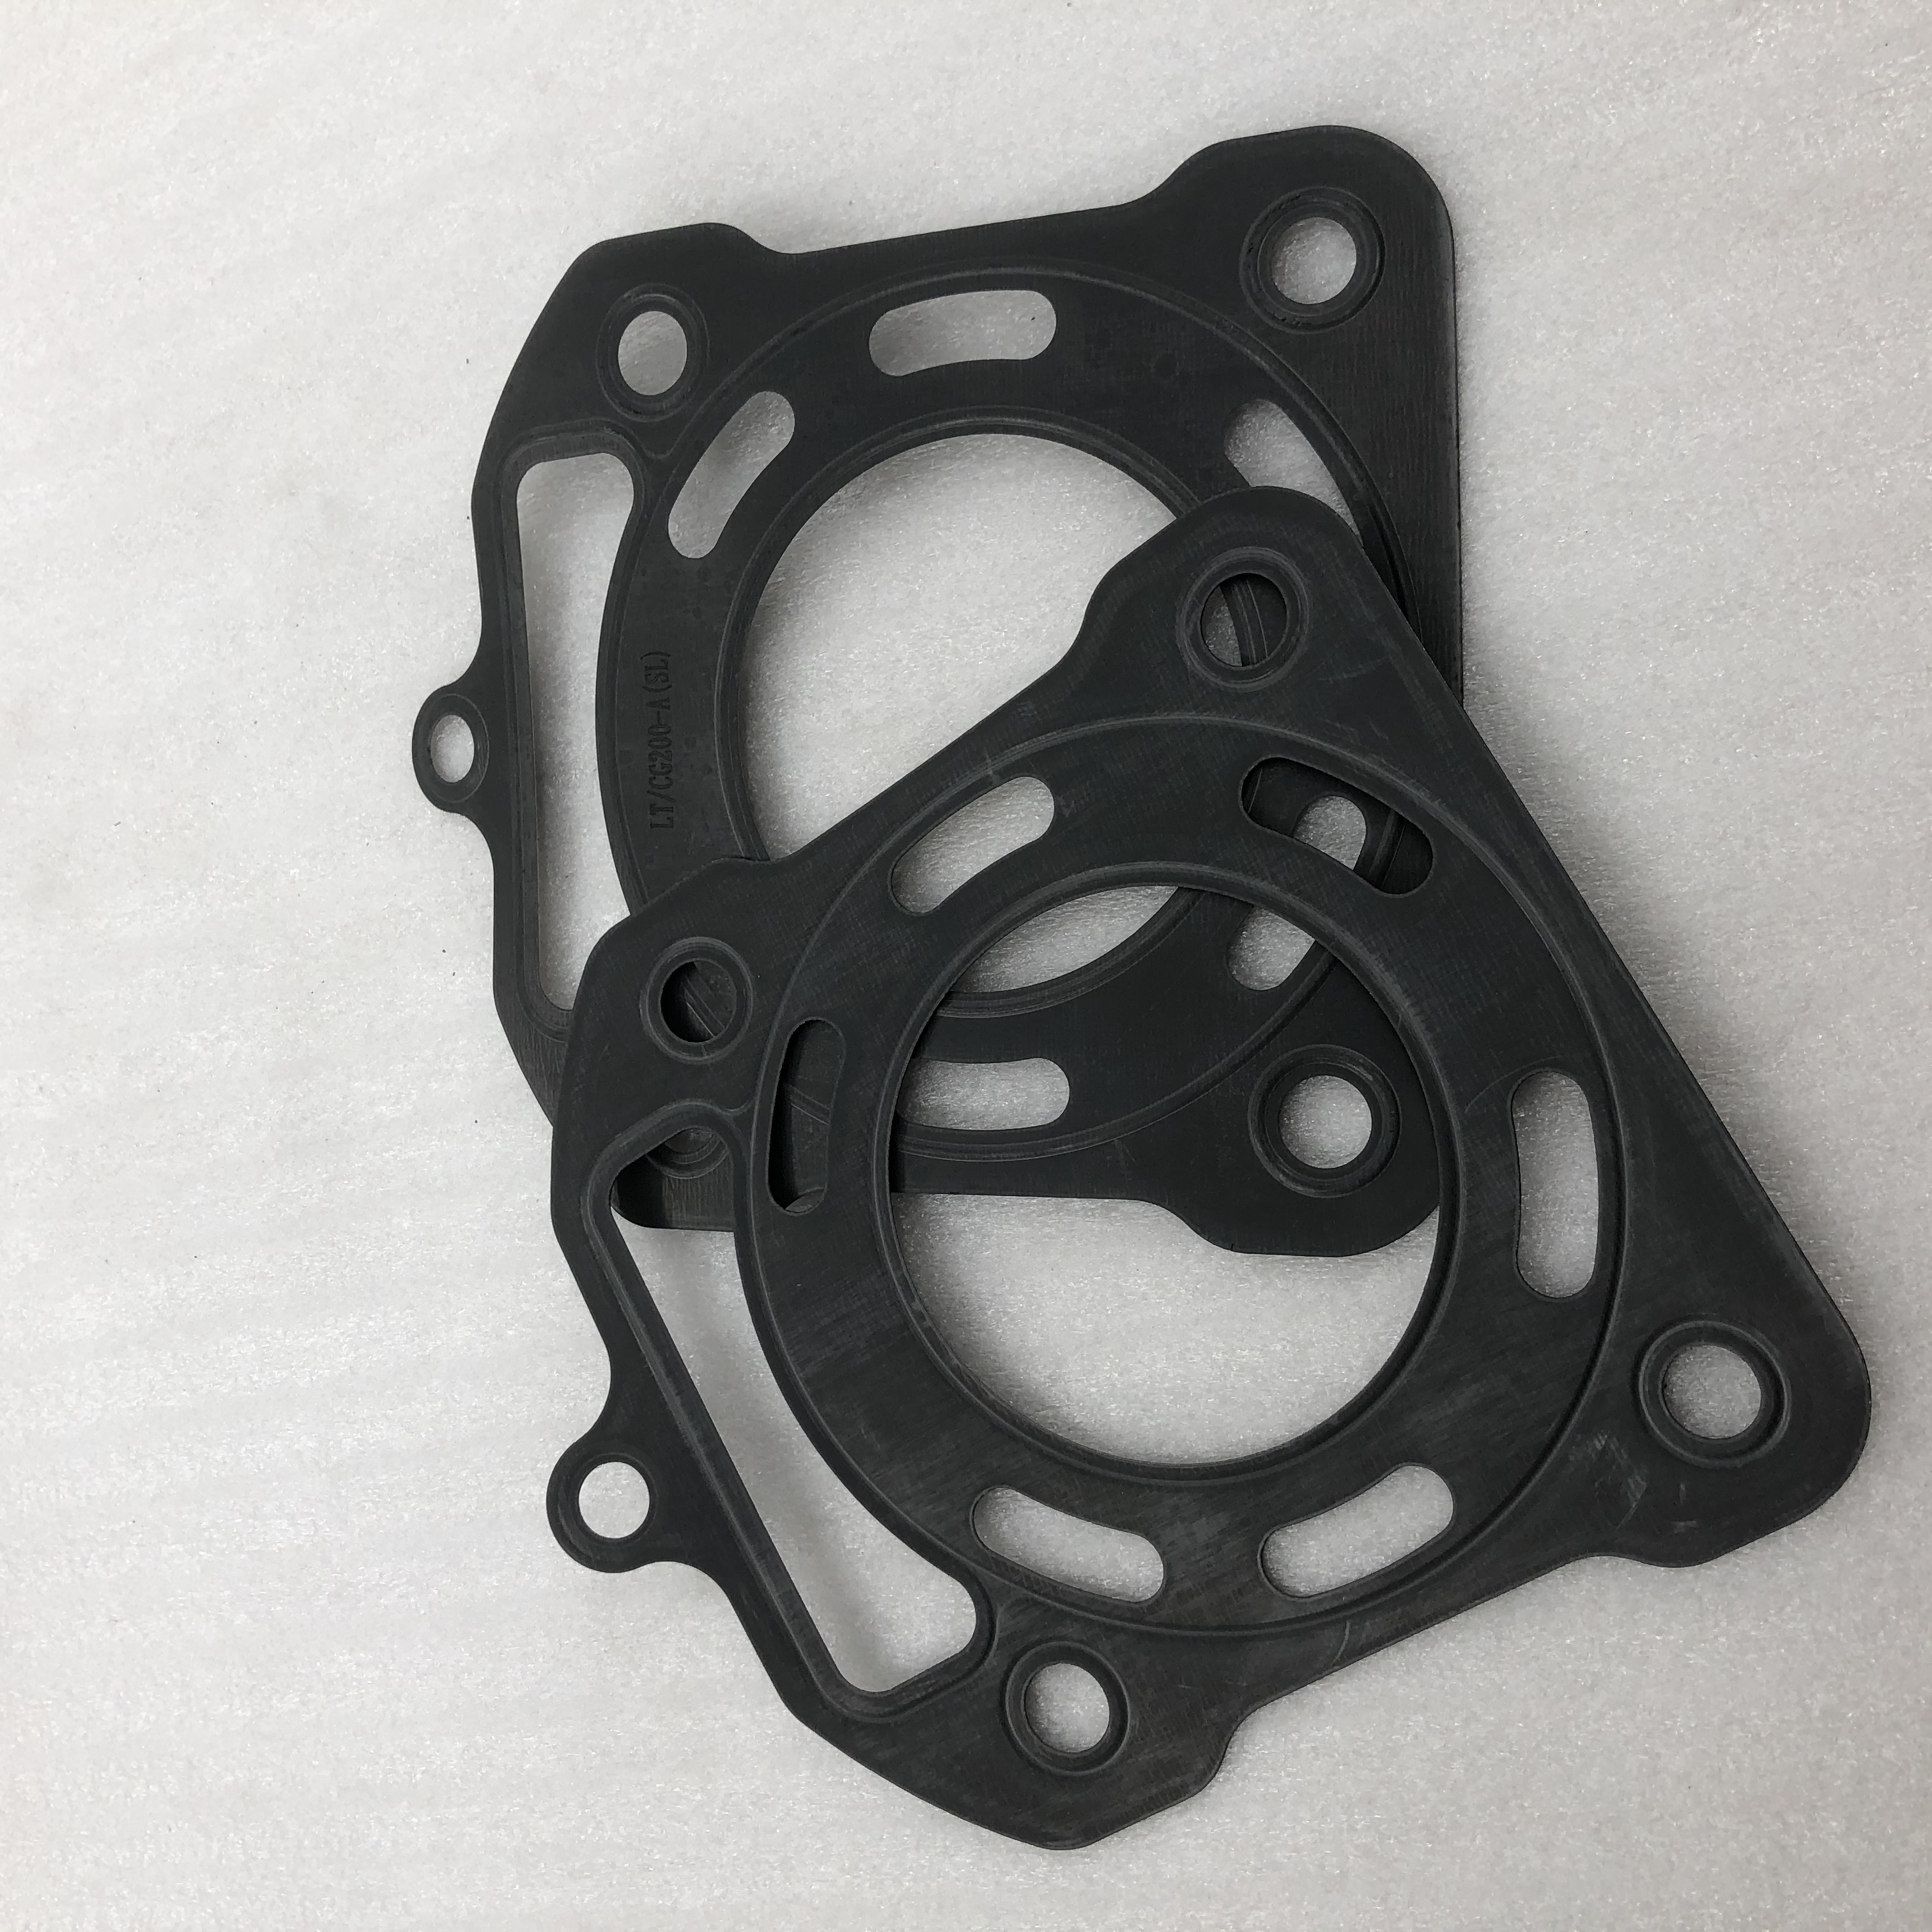 DAYANG tricycle spare parts replacement kit Cylinder Head Gasket For gasoline Engine Parts  CG200-A